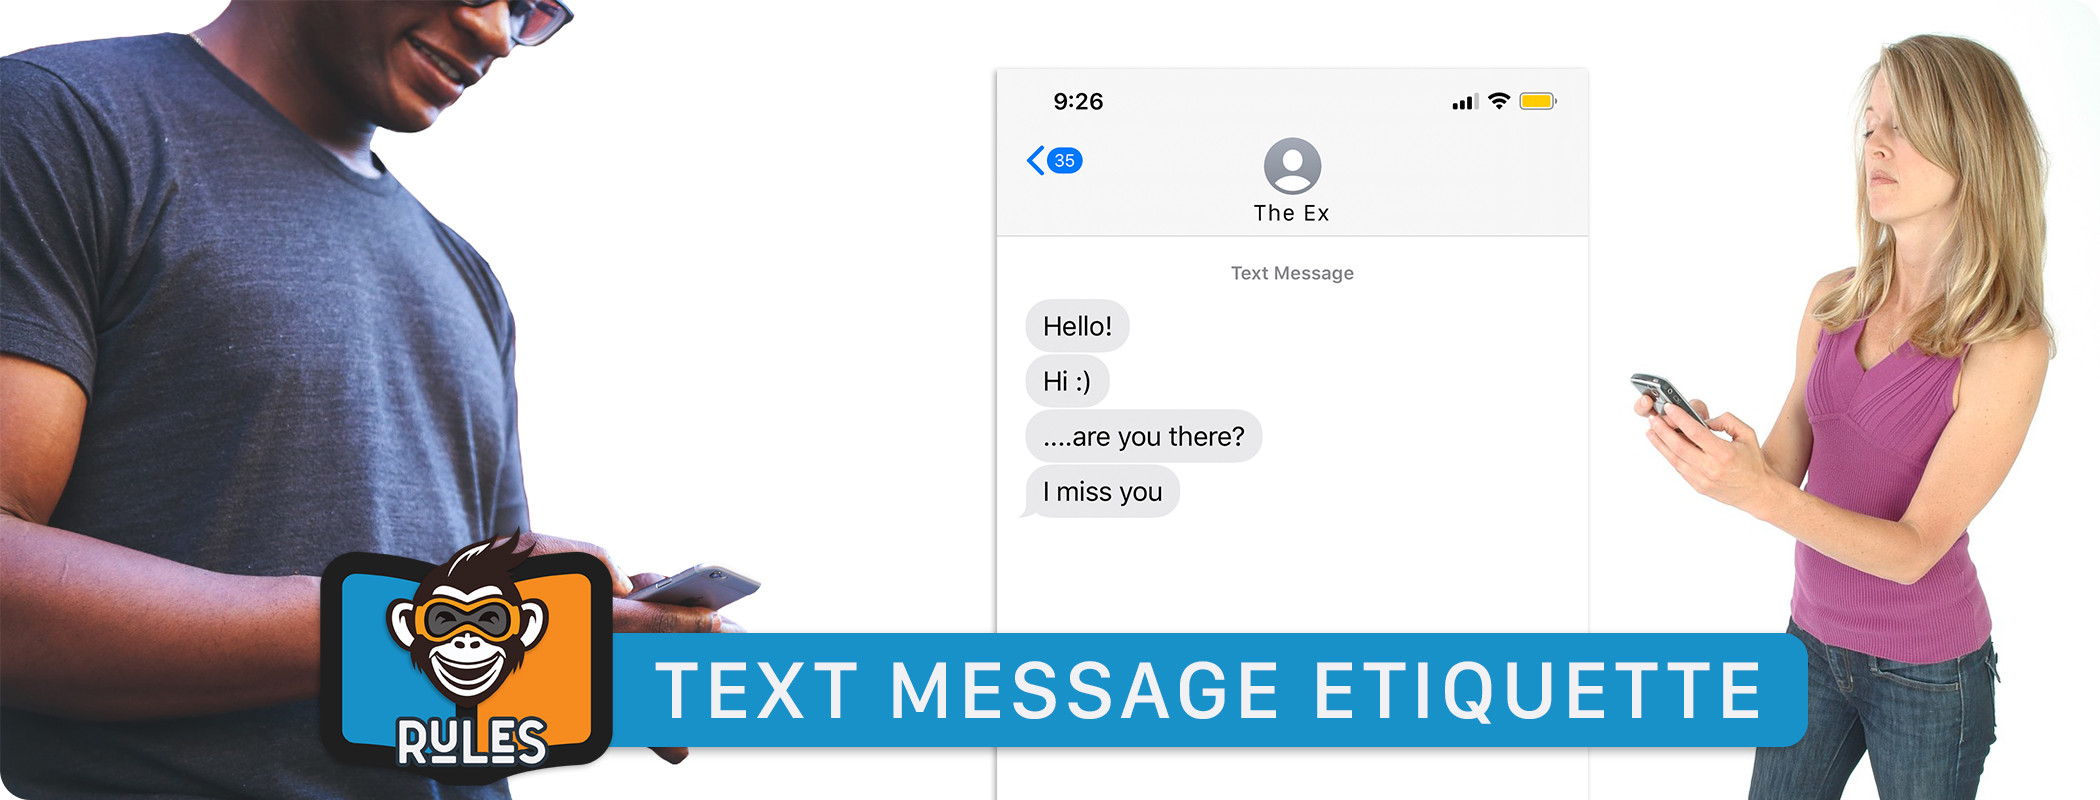 The Top Ten Rules Of Text Message Etiquette